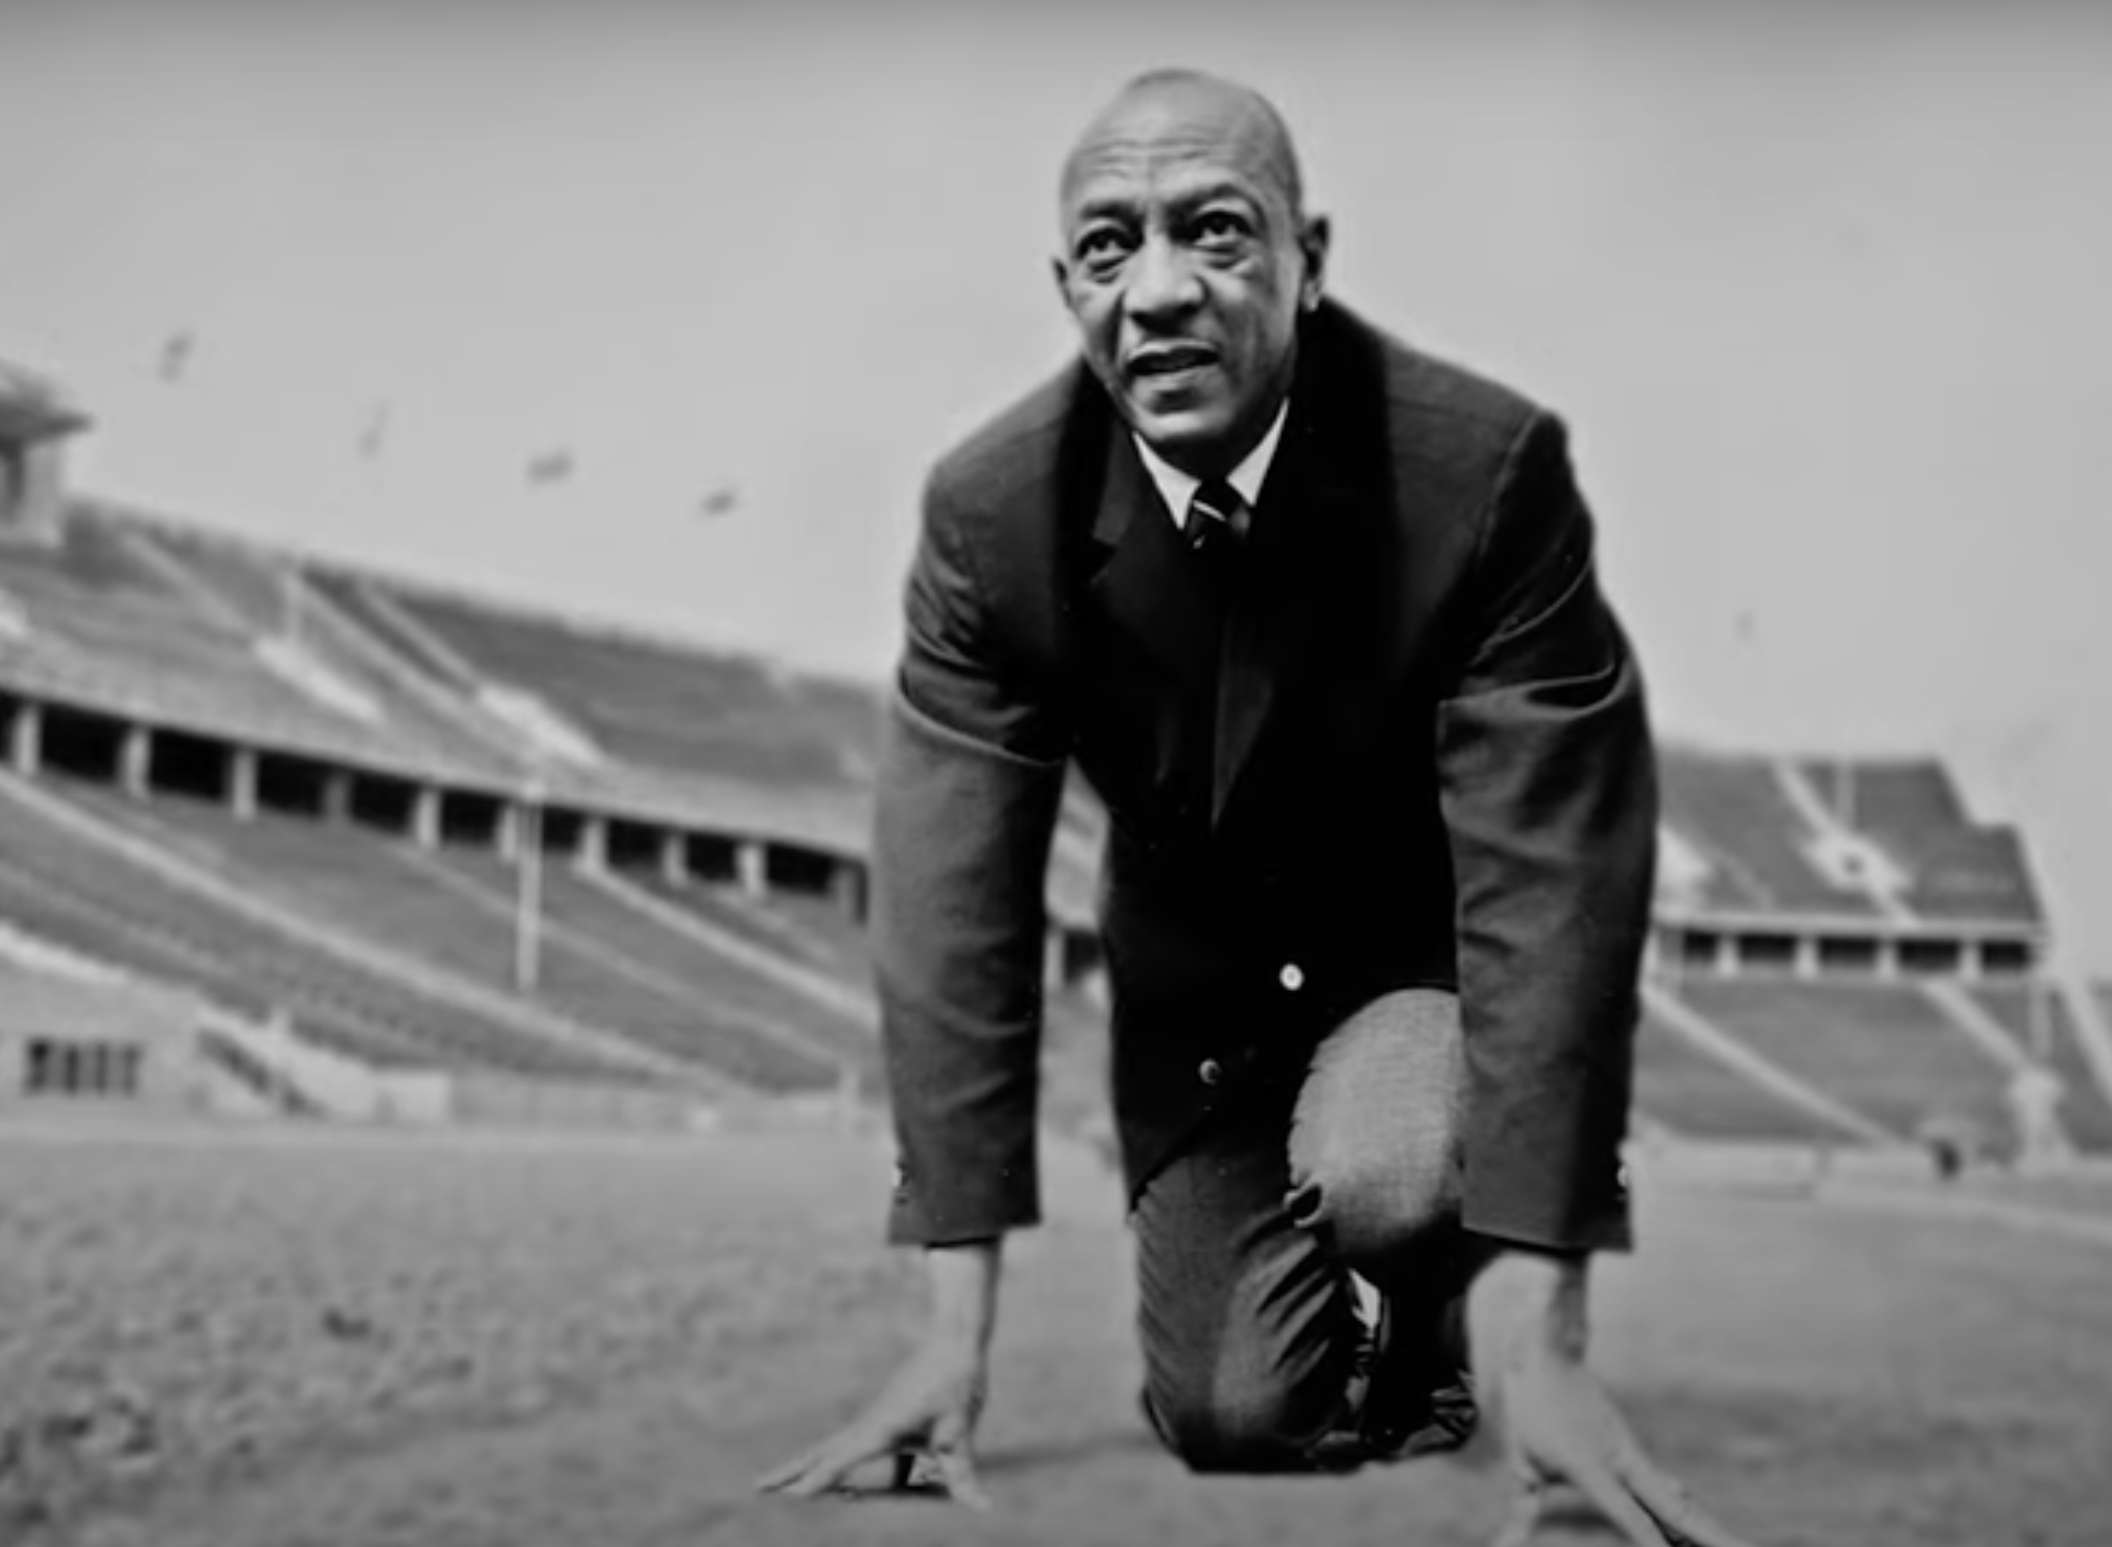 Running for the Gold: History Channel Revisits Jesse Owens' Olympics Triumph in New Documentary